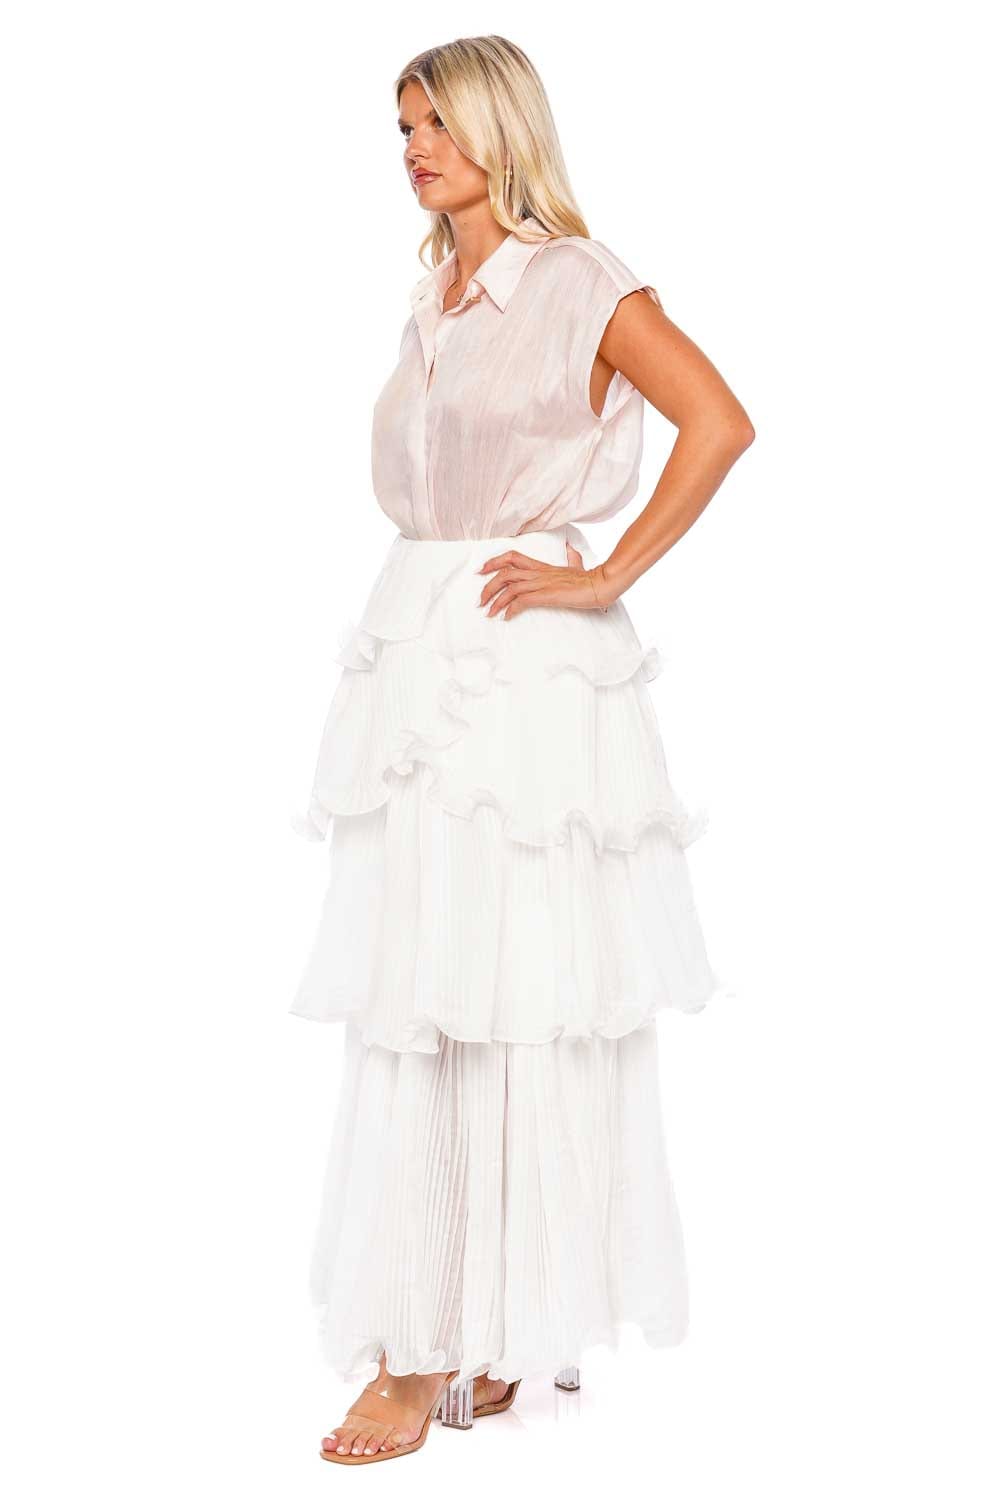 Cosmos Ivory Tiered Ruffle Maxi SKirt